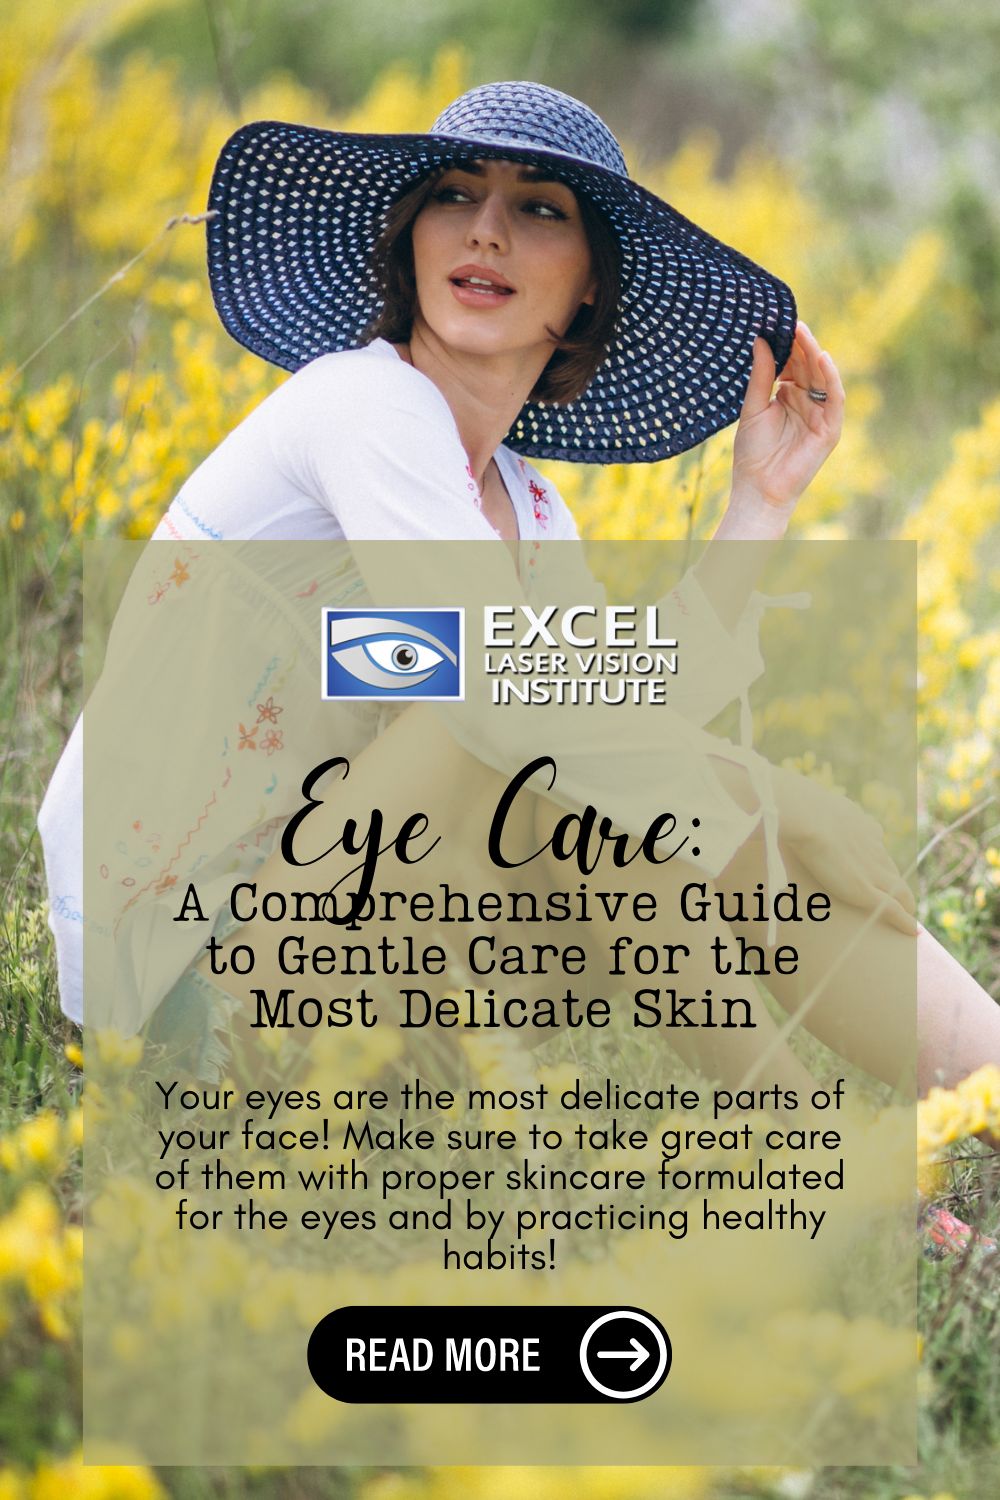 woman-with-sun-hat-on-a-flower-field-blog-title-Eye-Care-A-Comprehensive-Guide-to-Gentle-Care-for-the-Most-Delicate-Skin-Pinterest-Pin